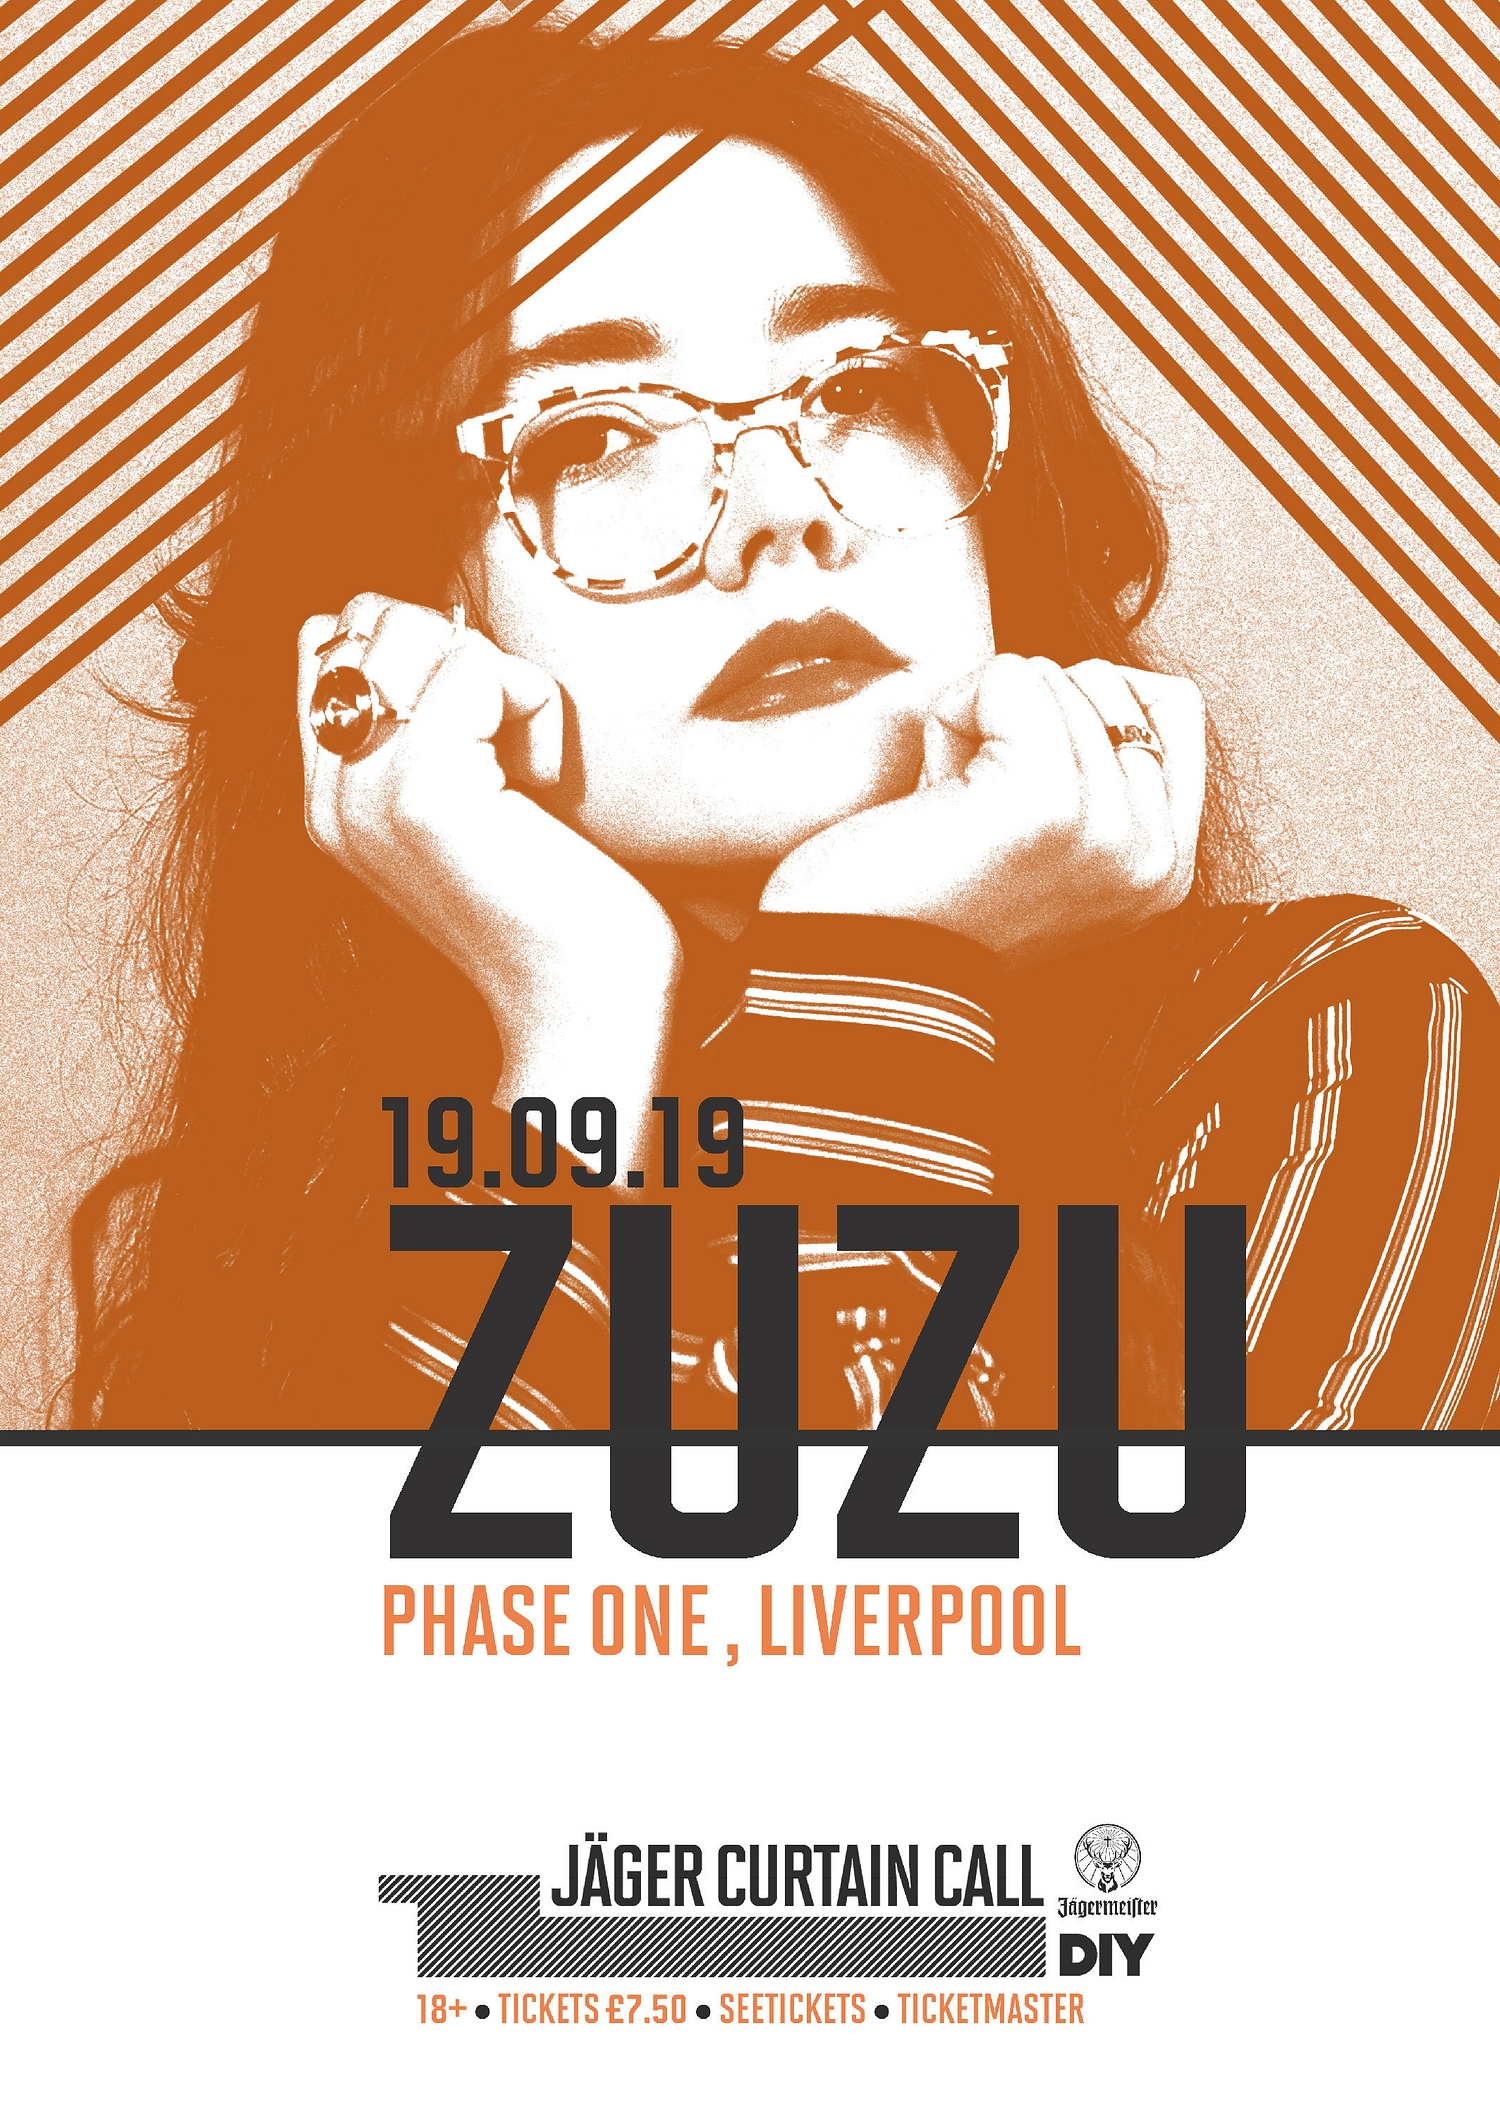 Zuzu to play Liverpool's Phase One as part of Jäger Curtain Call 2019